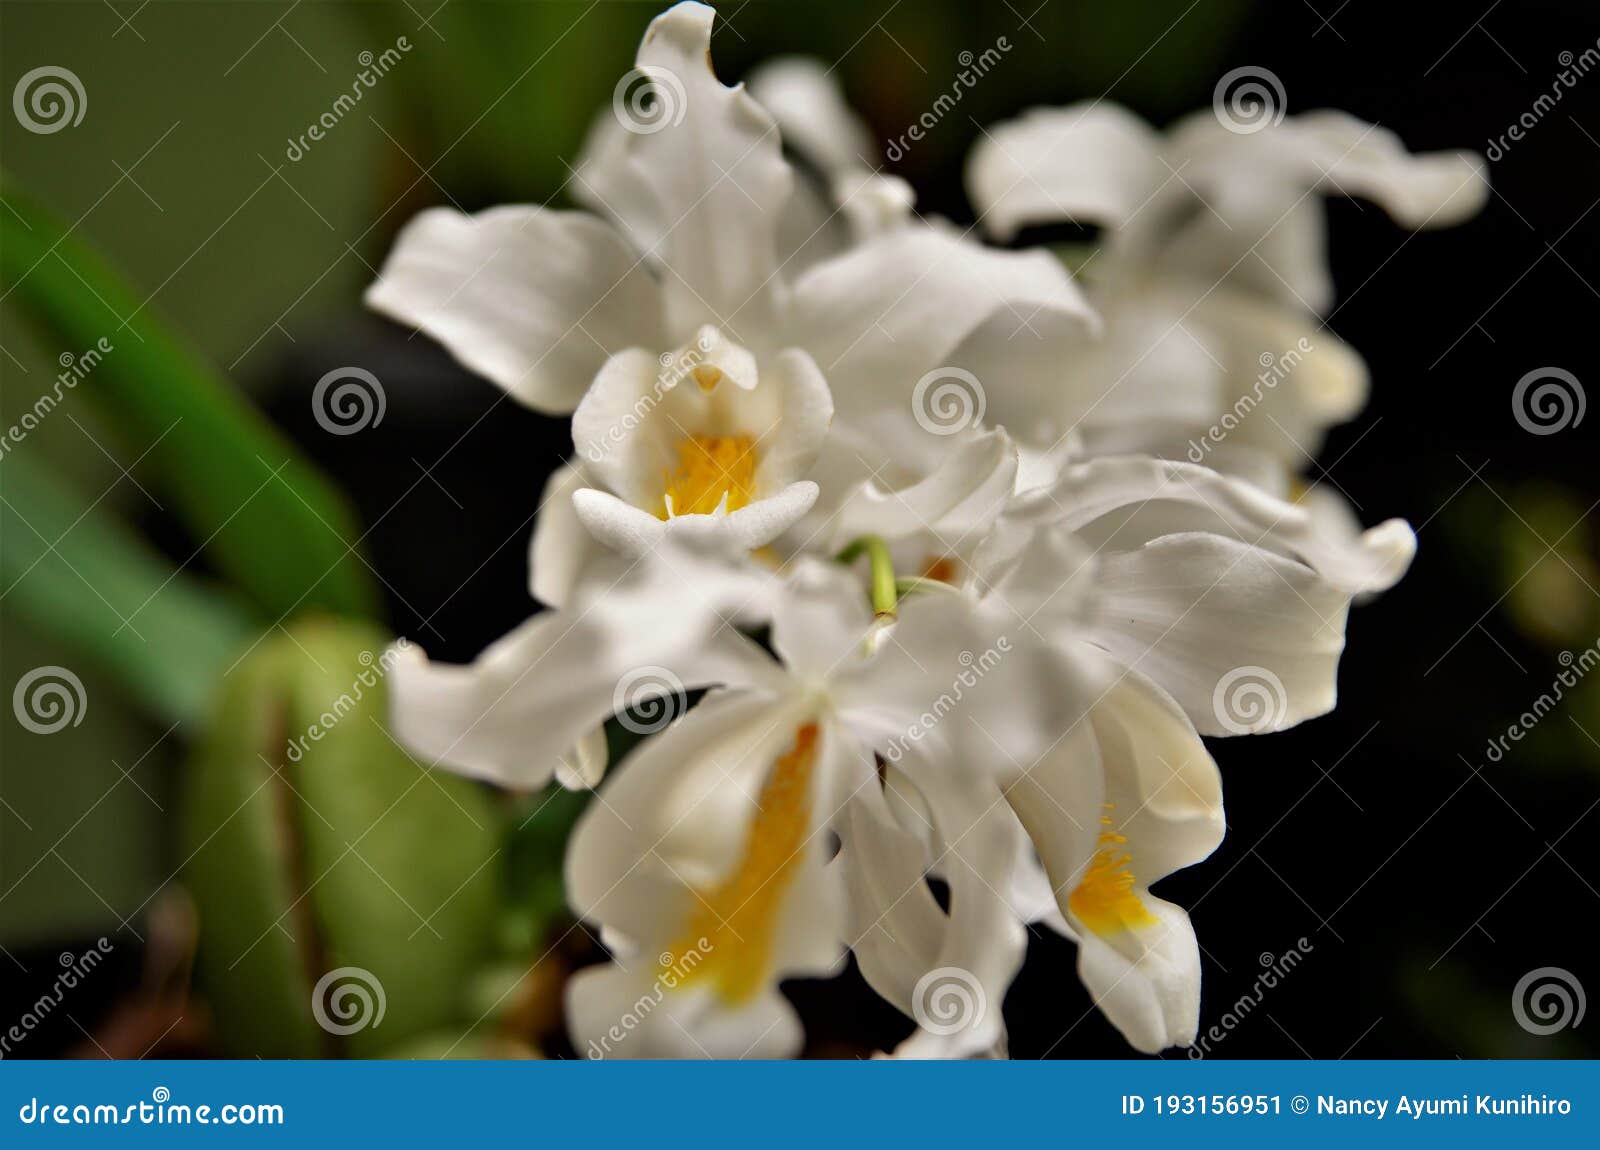 various flowers of the orchid coelogyne cristata